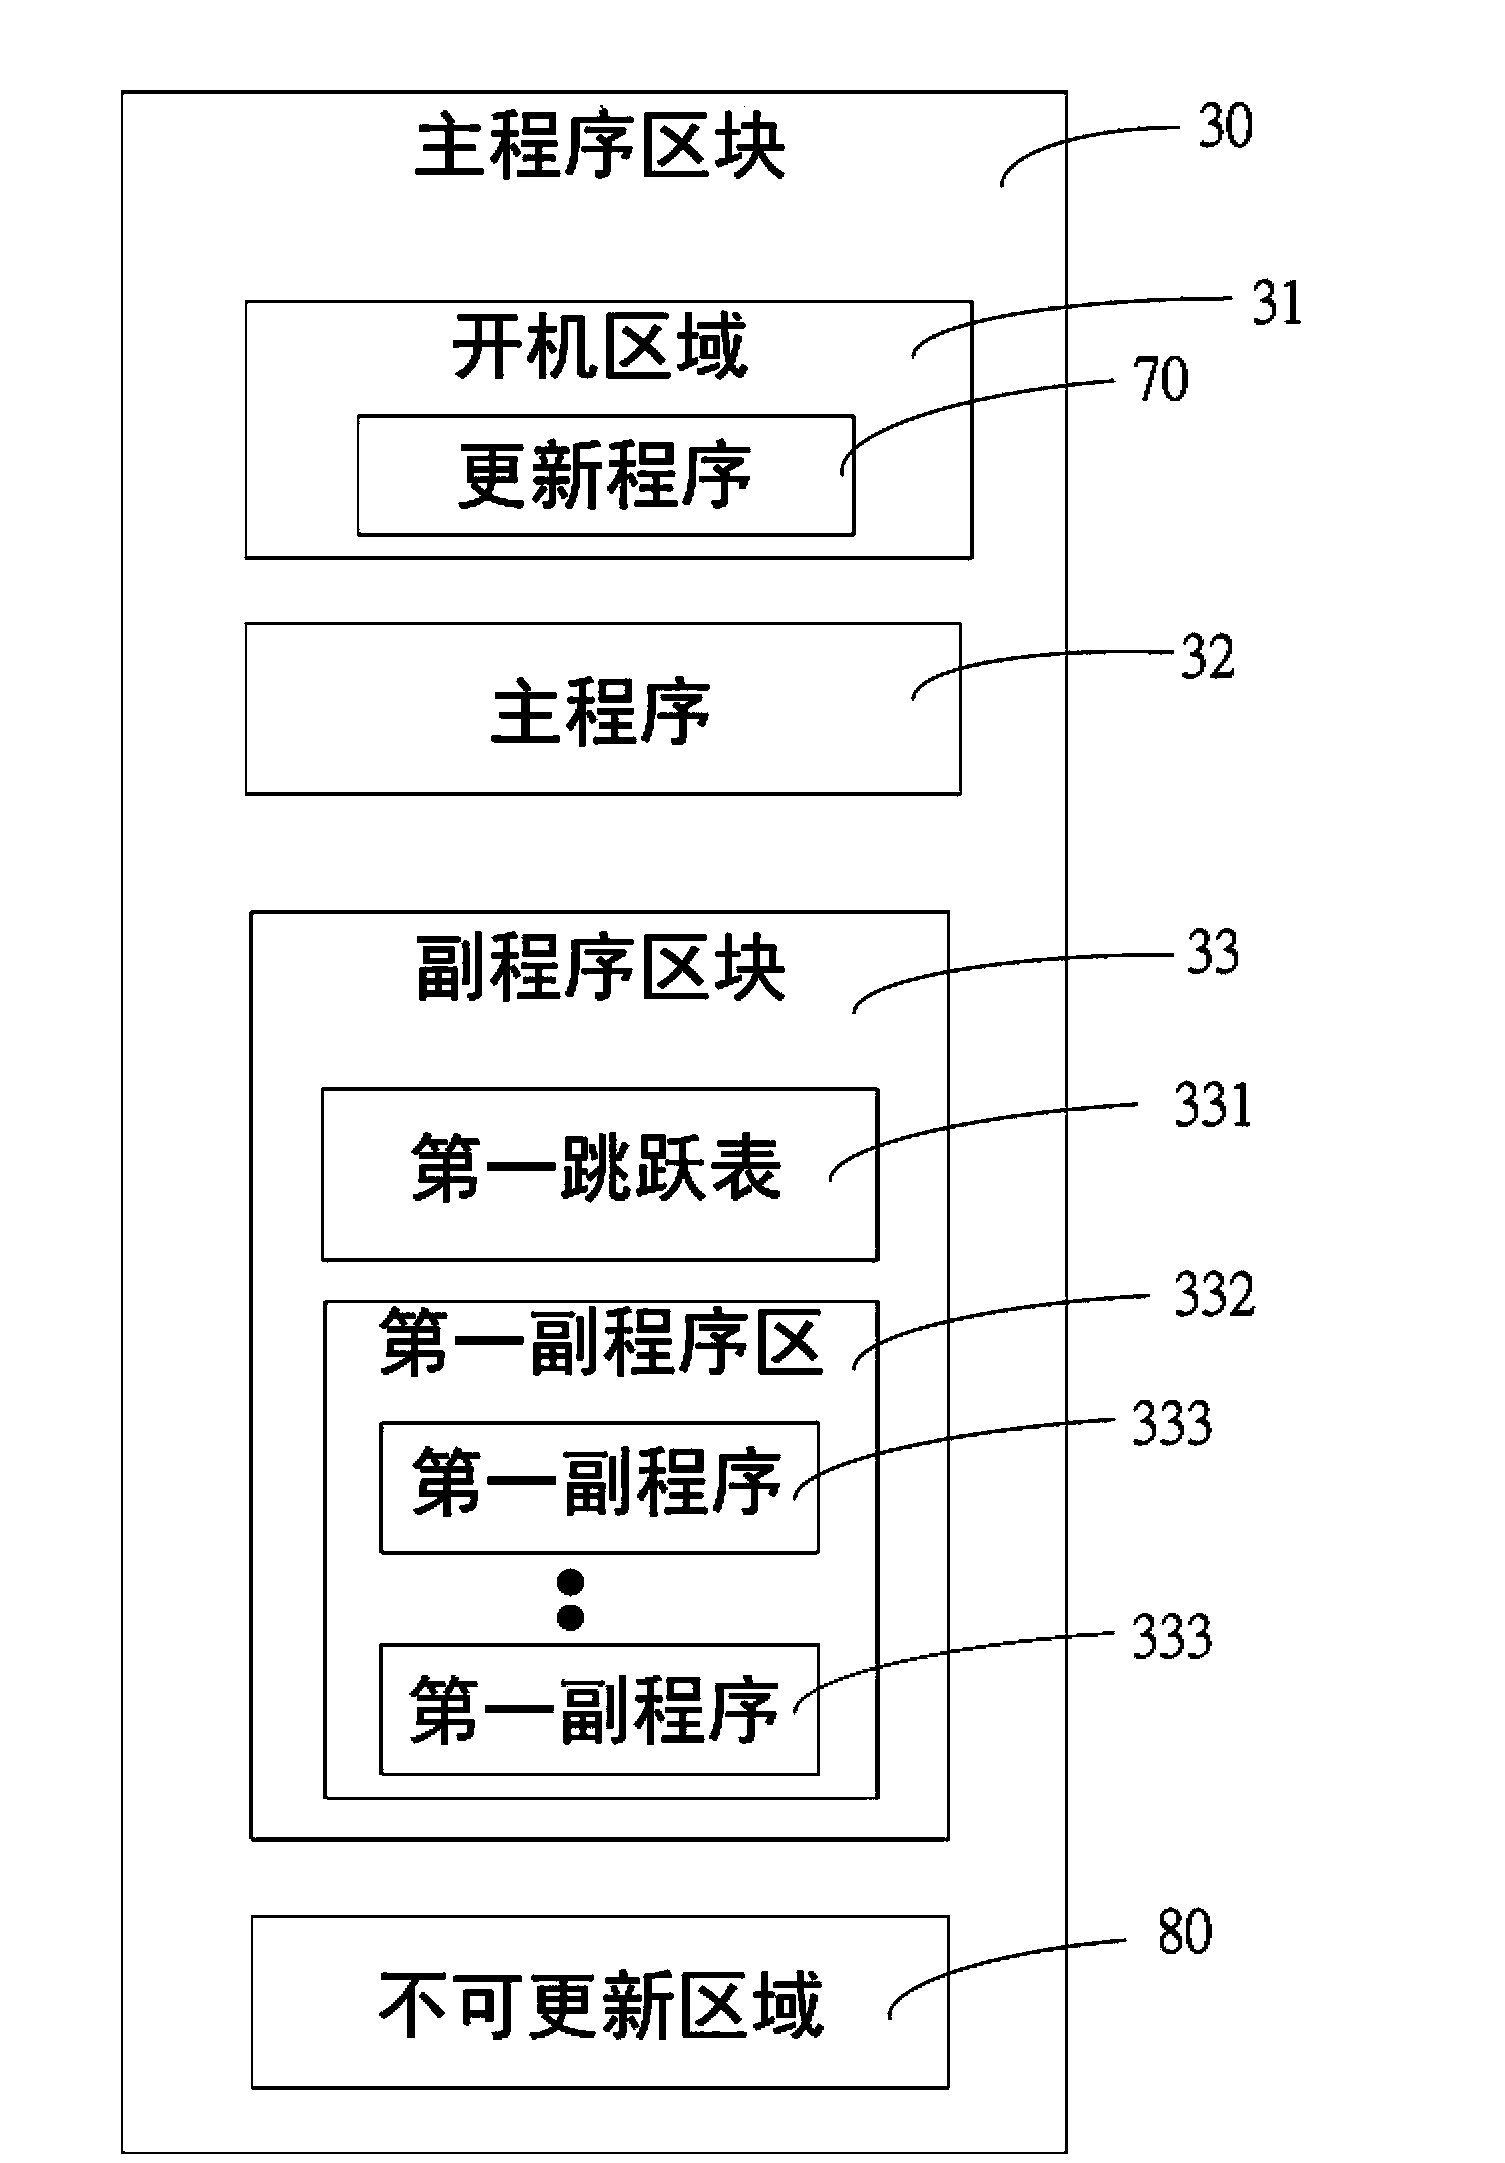 Electronic device with programs capable of being updated in segmented manner